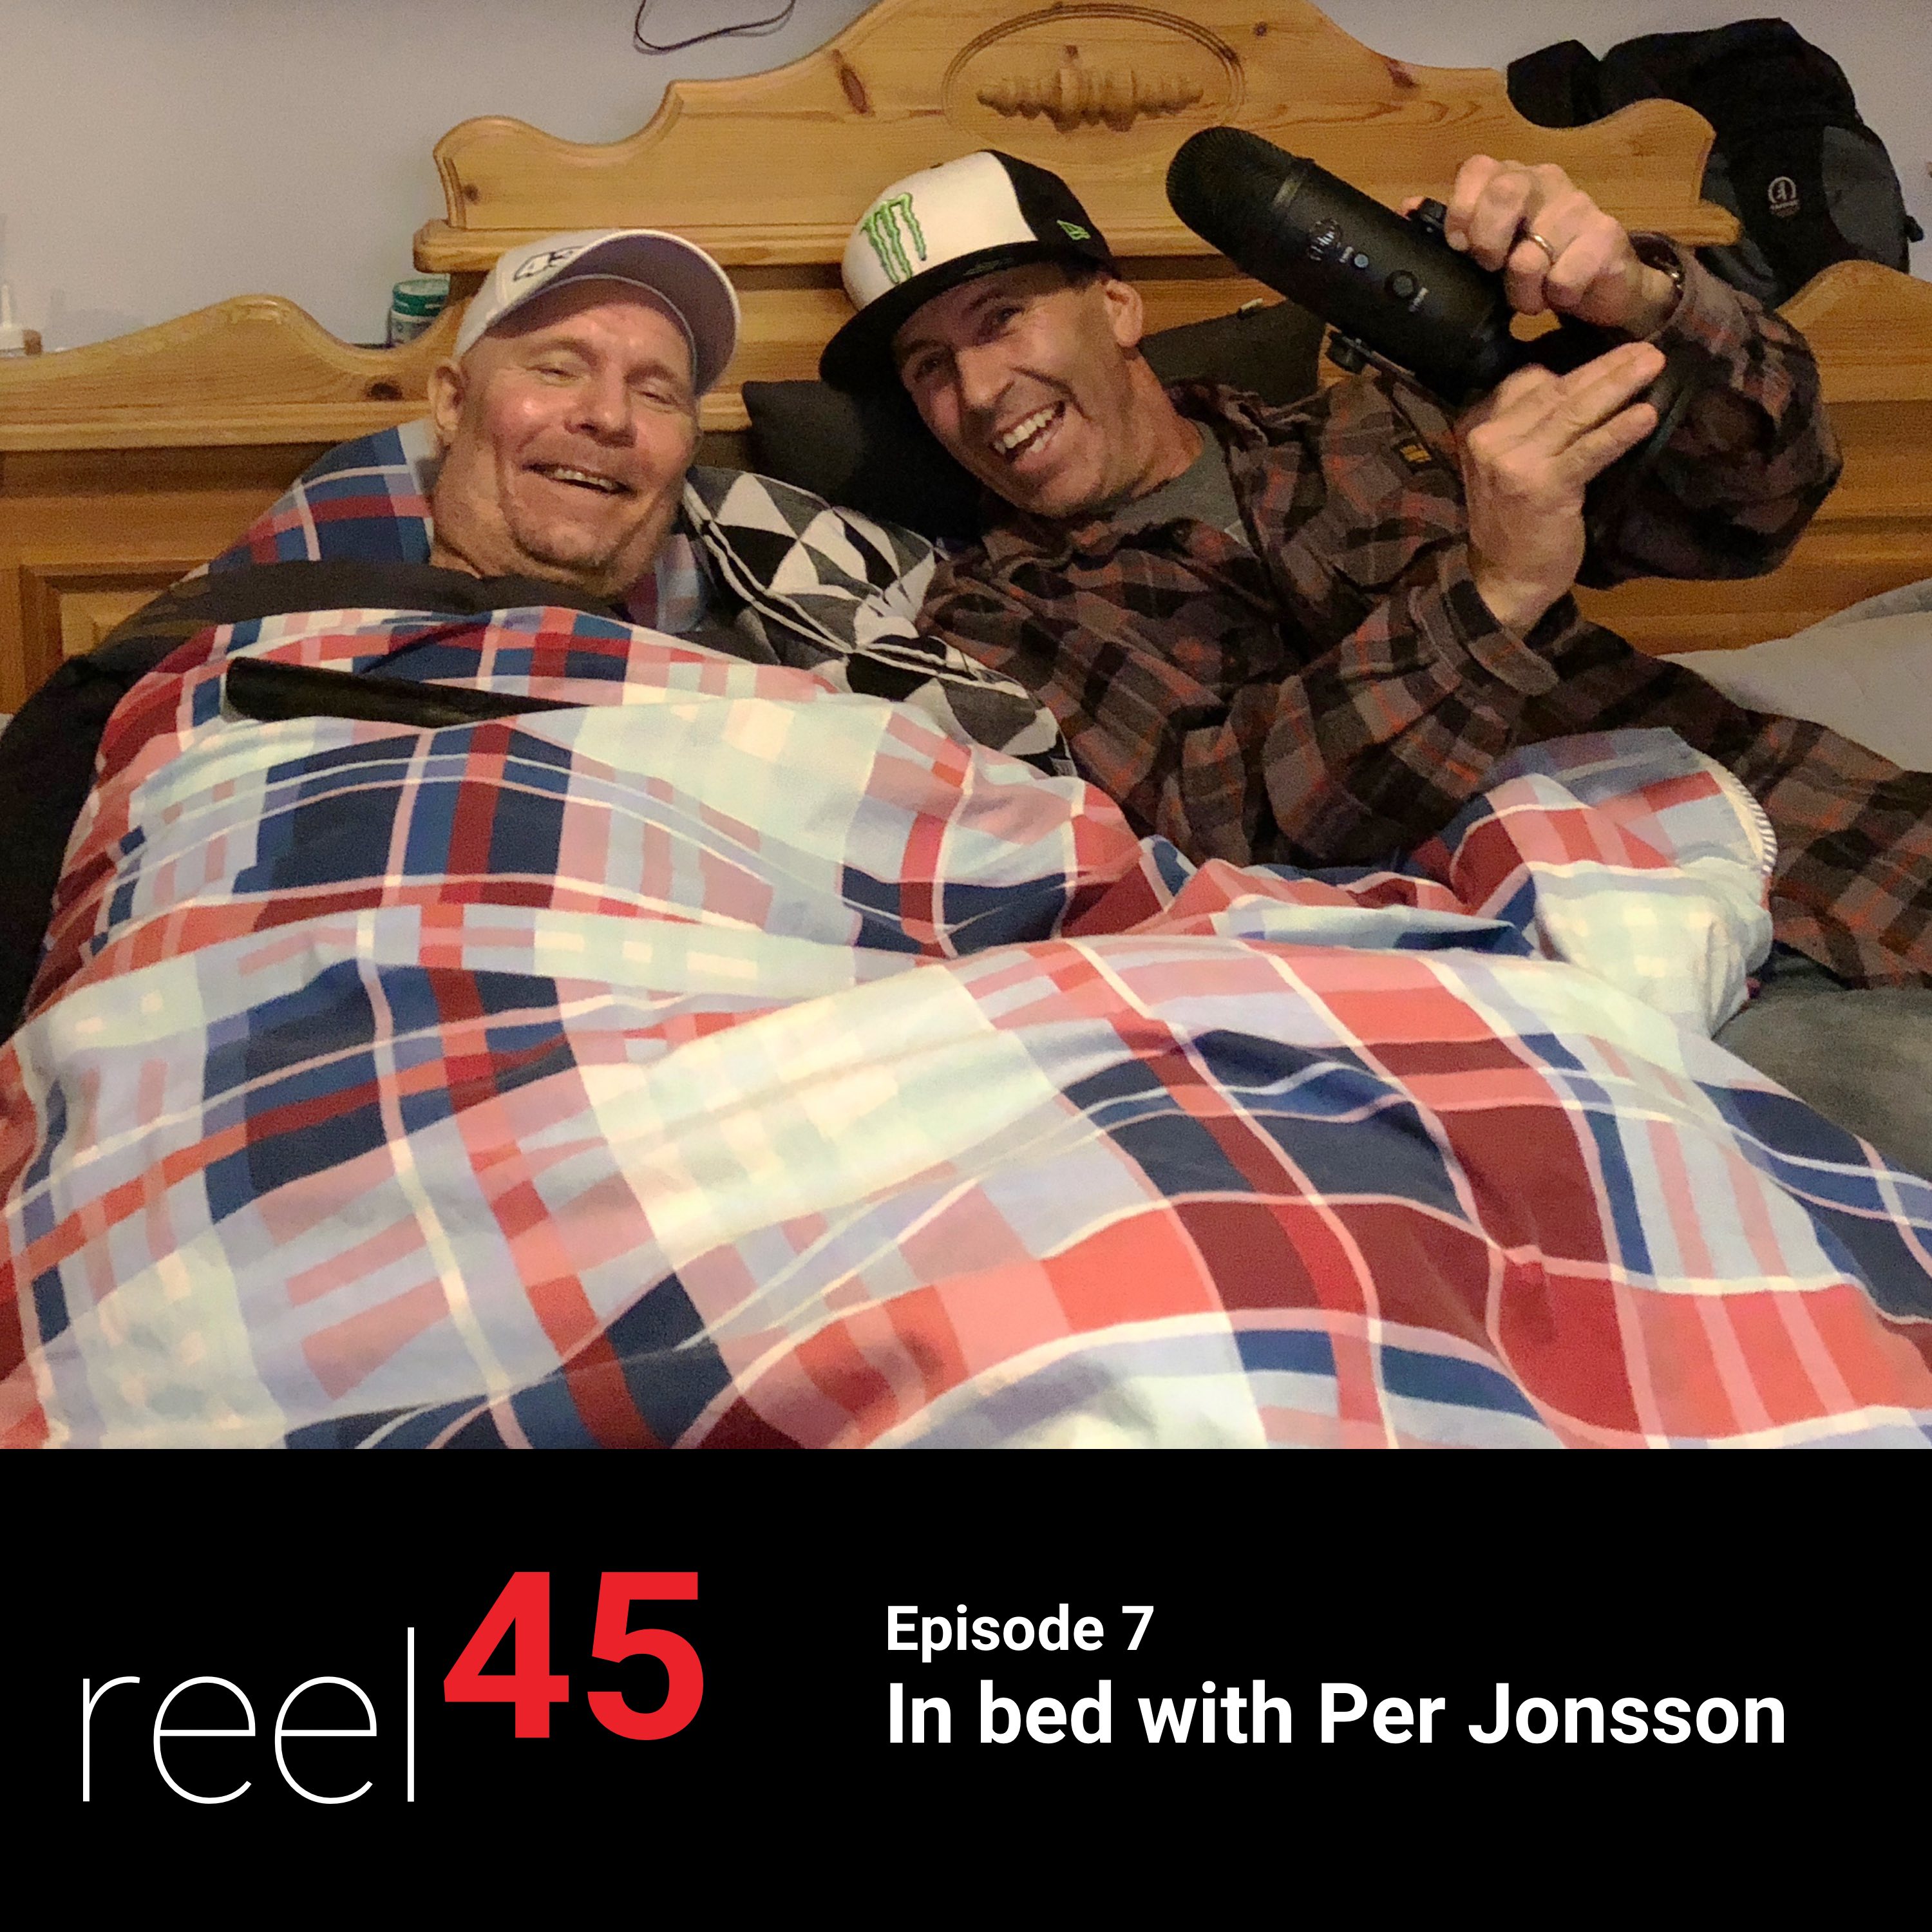 Episode 7 - In bed with Per Jonsson